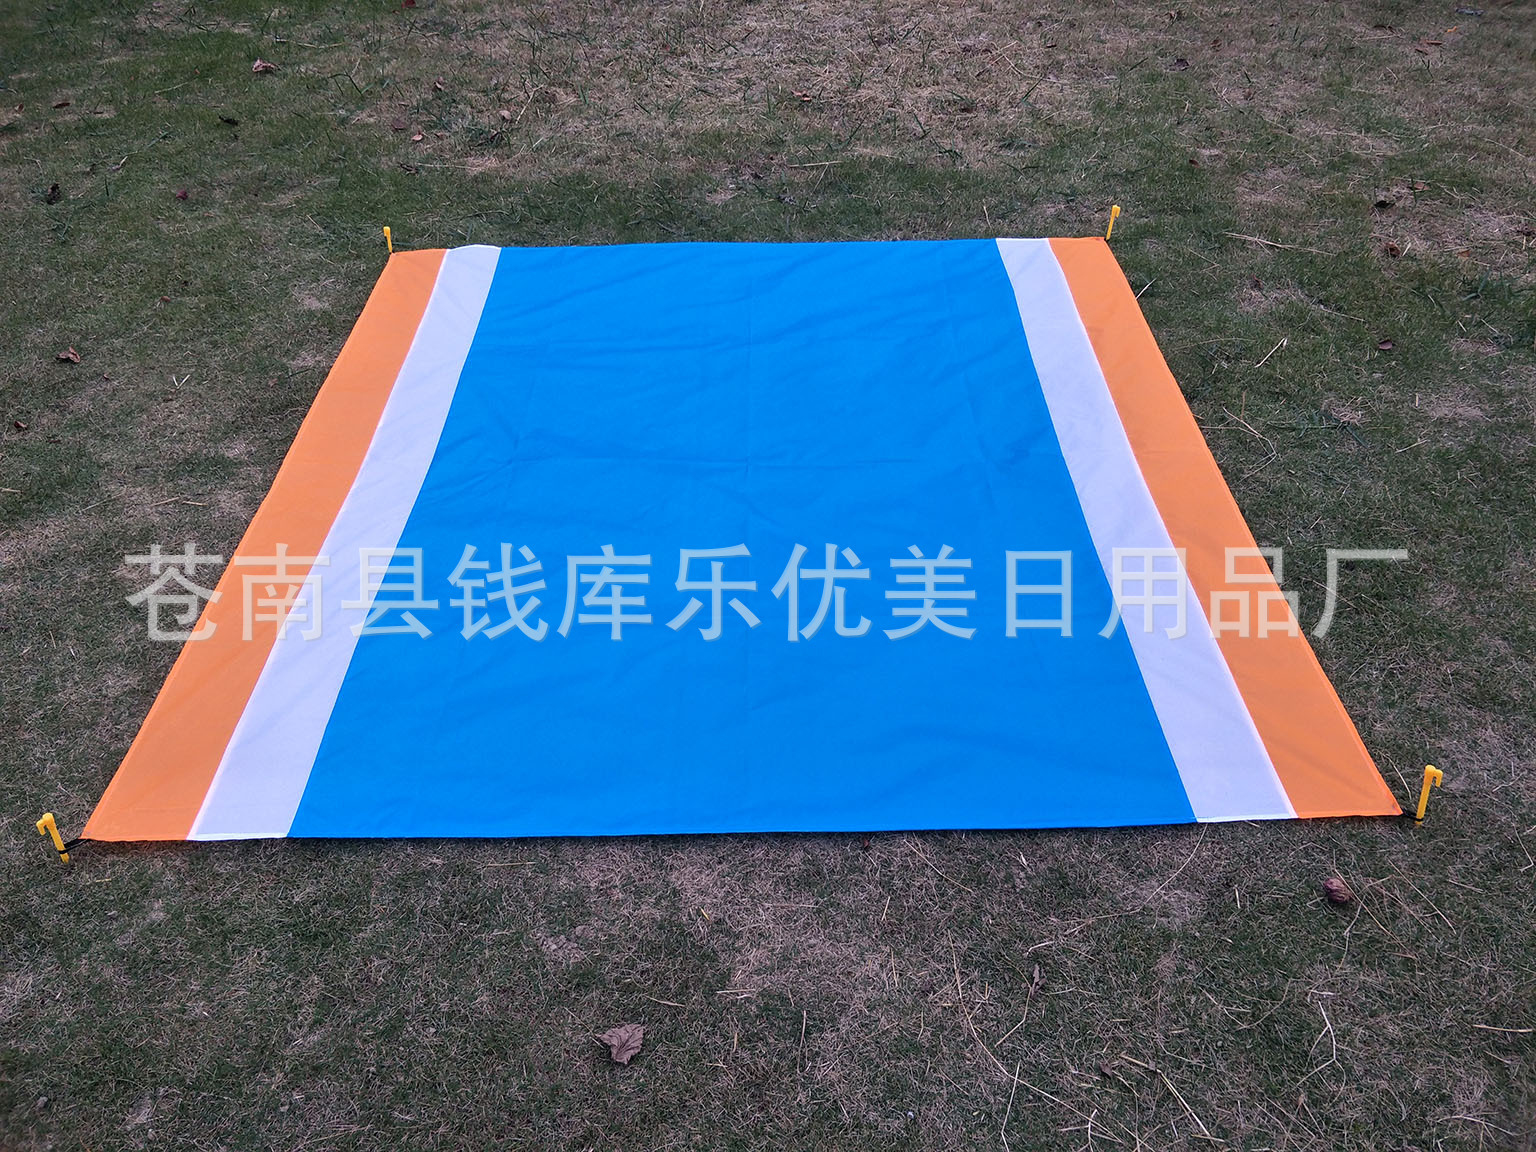 Factory Wholesale Outdoor Camping Waterproof Beach Mat Portable Foldable Polyester Picnic Mat Hot Sale Hot Sale New